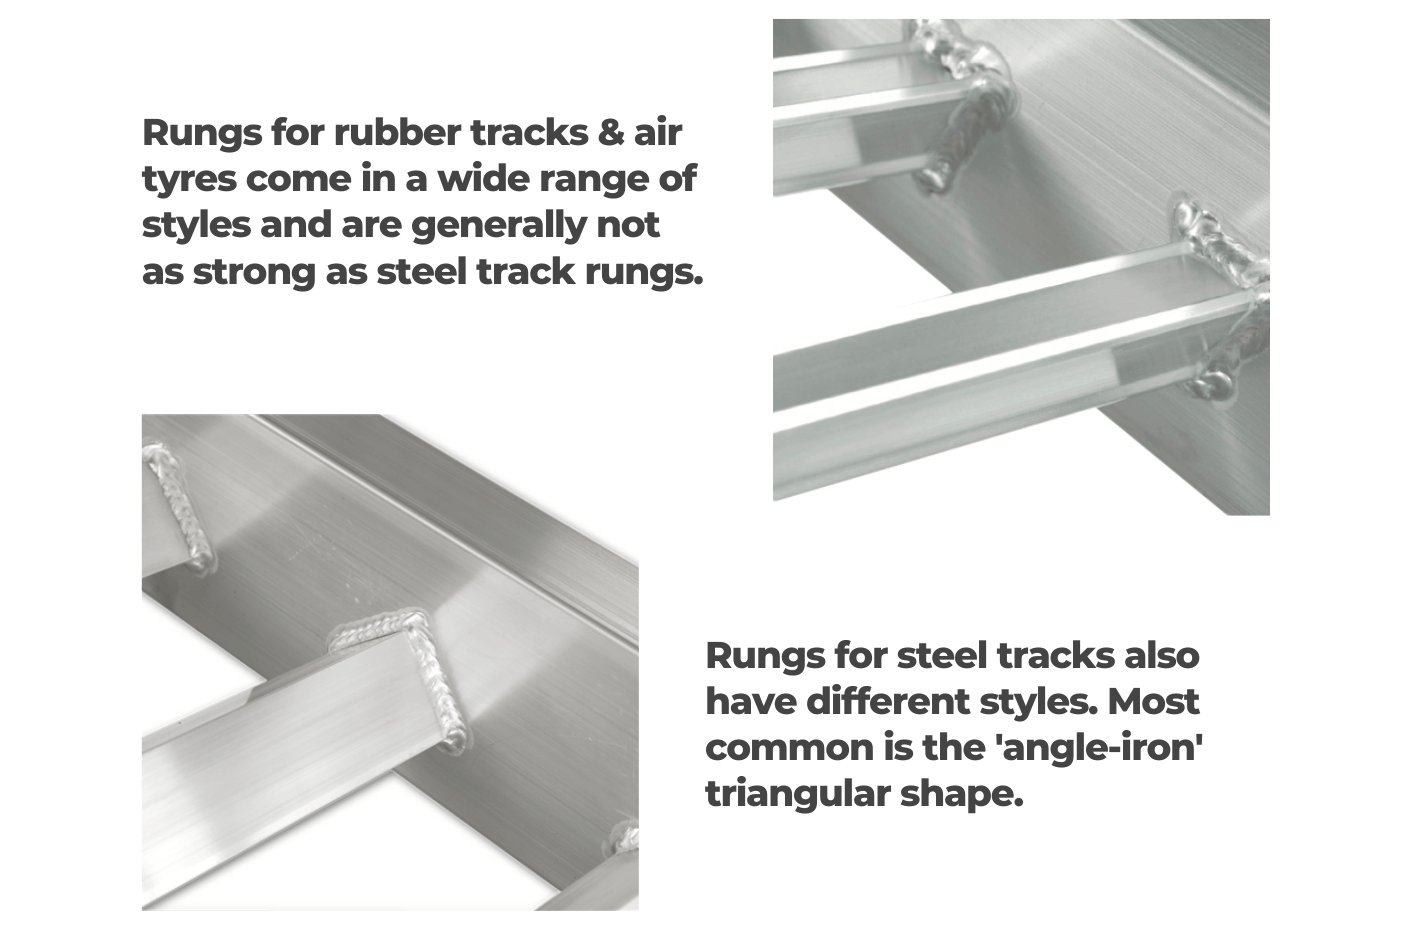 Steel track rungs vs rubber track rungs for aluminium loading ramps